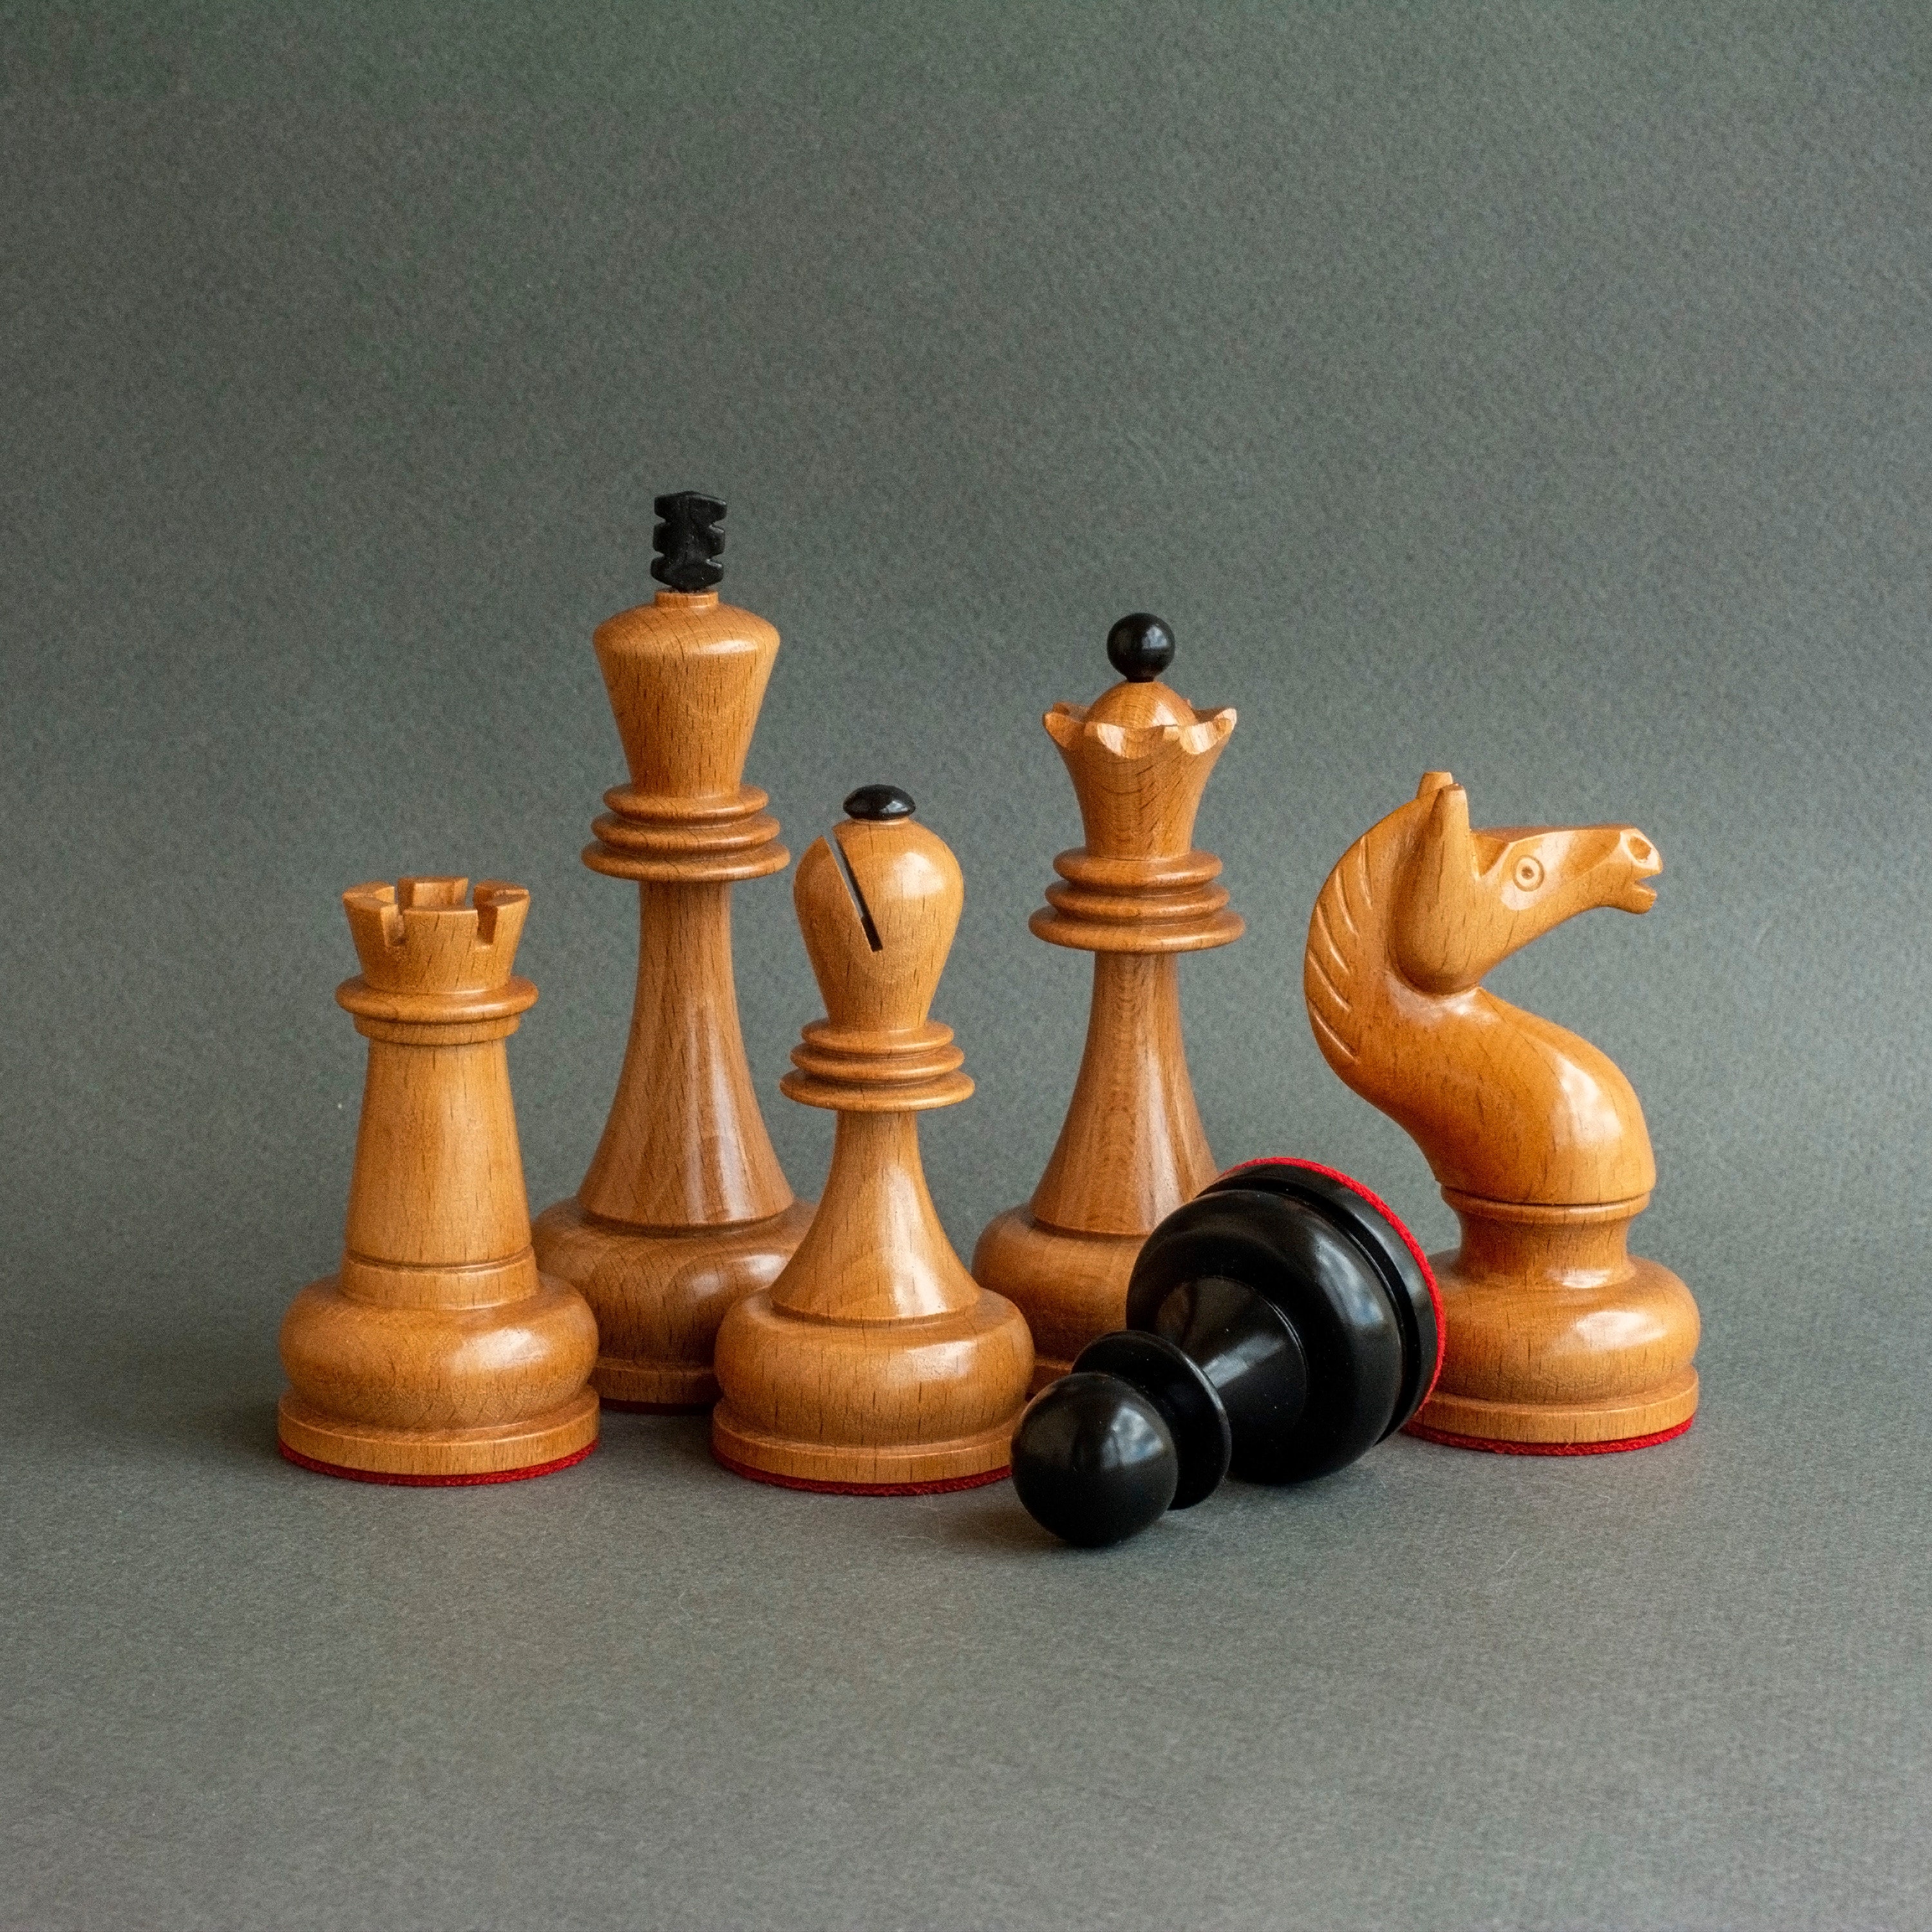 Mikhail Tal Chess Products  The Life, Chess Games and Products of World  Champion Mikhail Tal